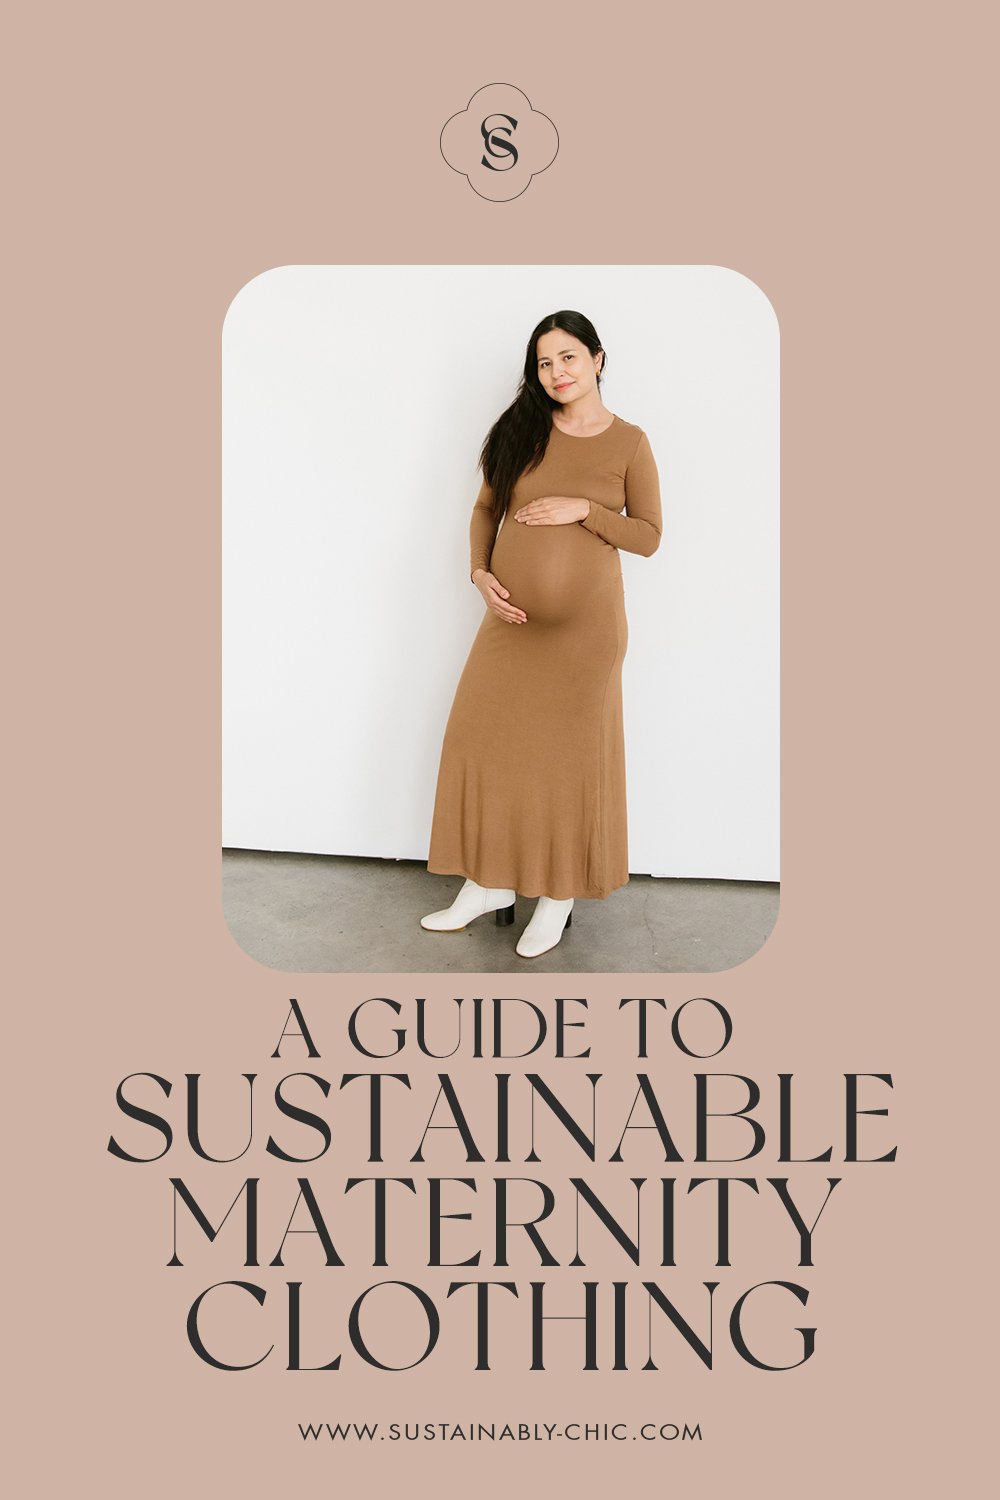 12 Brands for Ethically Made Maternity & Pregnancy Wear in